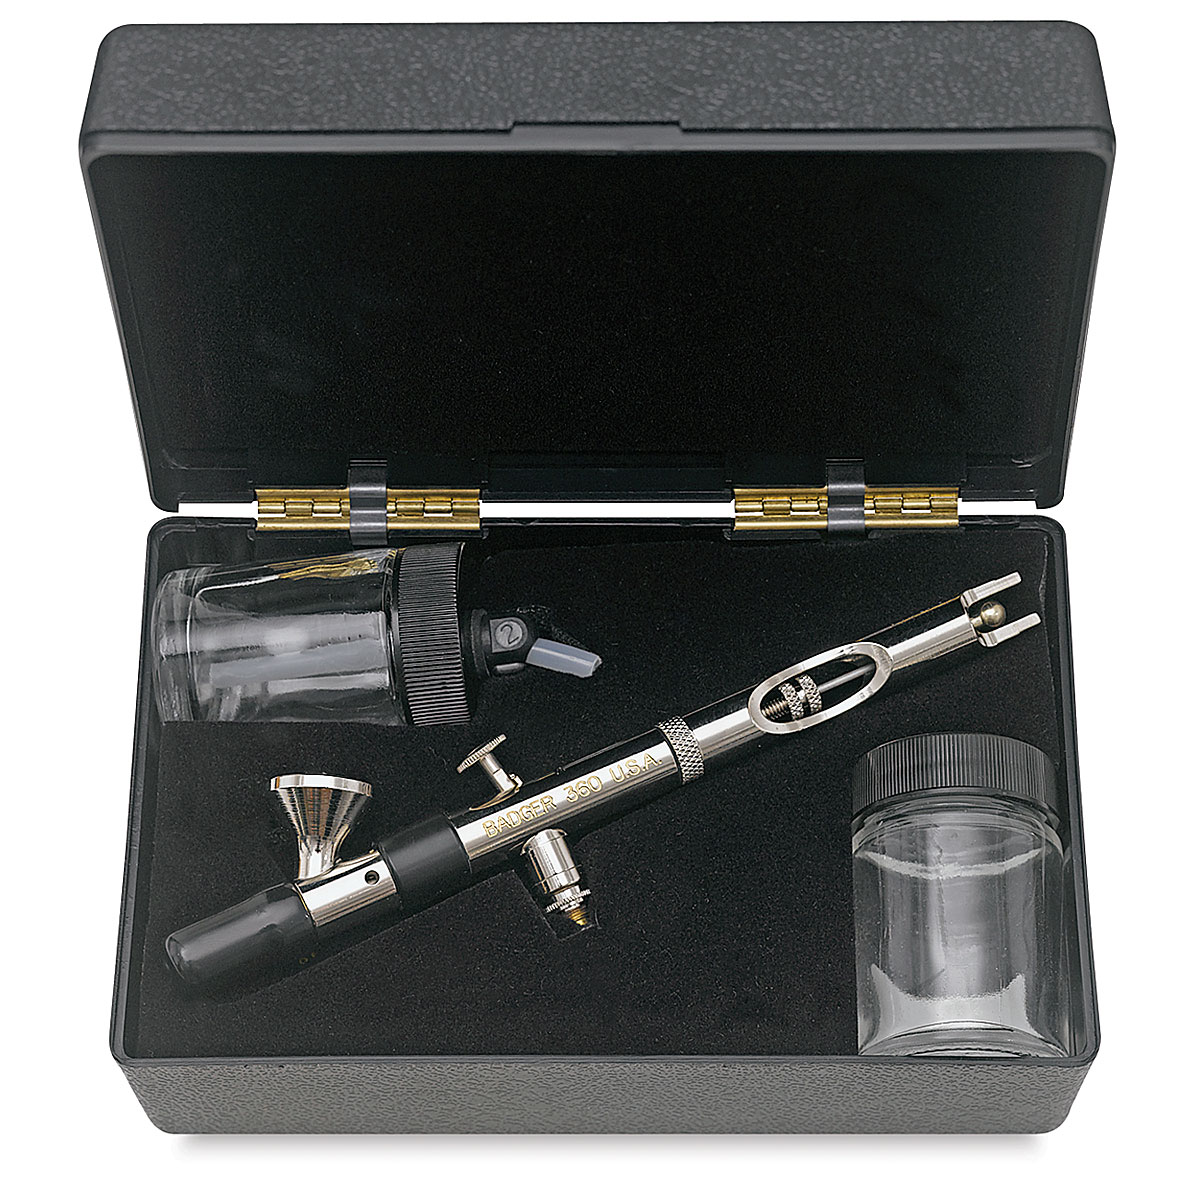 Badger Airbrush 360-7 Universal Complete Airbrush Set Badger Airbrush 360-7  Universal Complete Airbrush Set [12BAD501] - $129.99 : Monsters in Motion,  Movie, TV Collectibles, Model Hobby Kits, Action Figures, Monsters in Motion